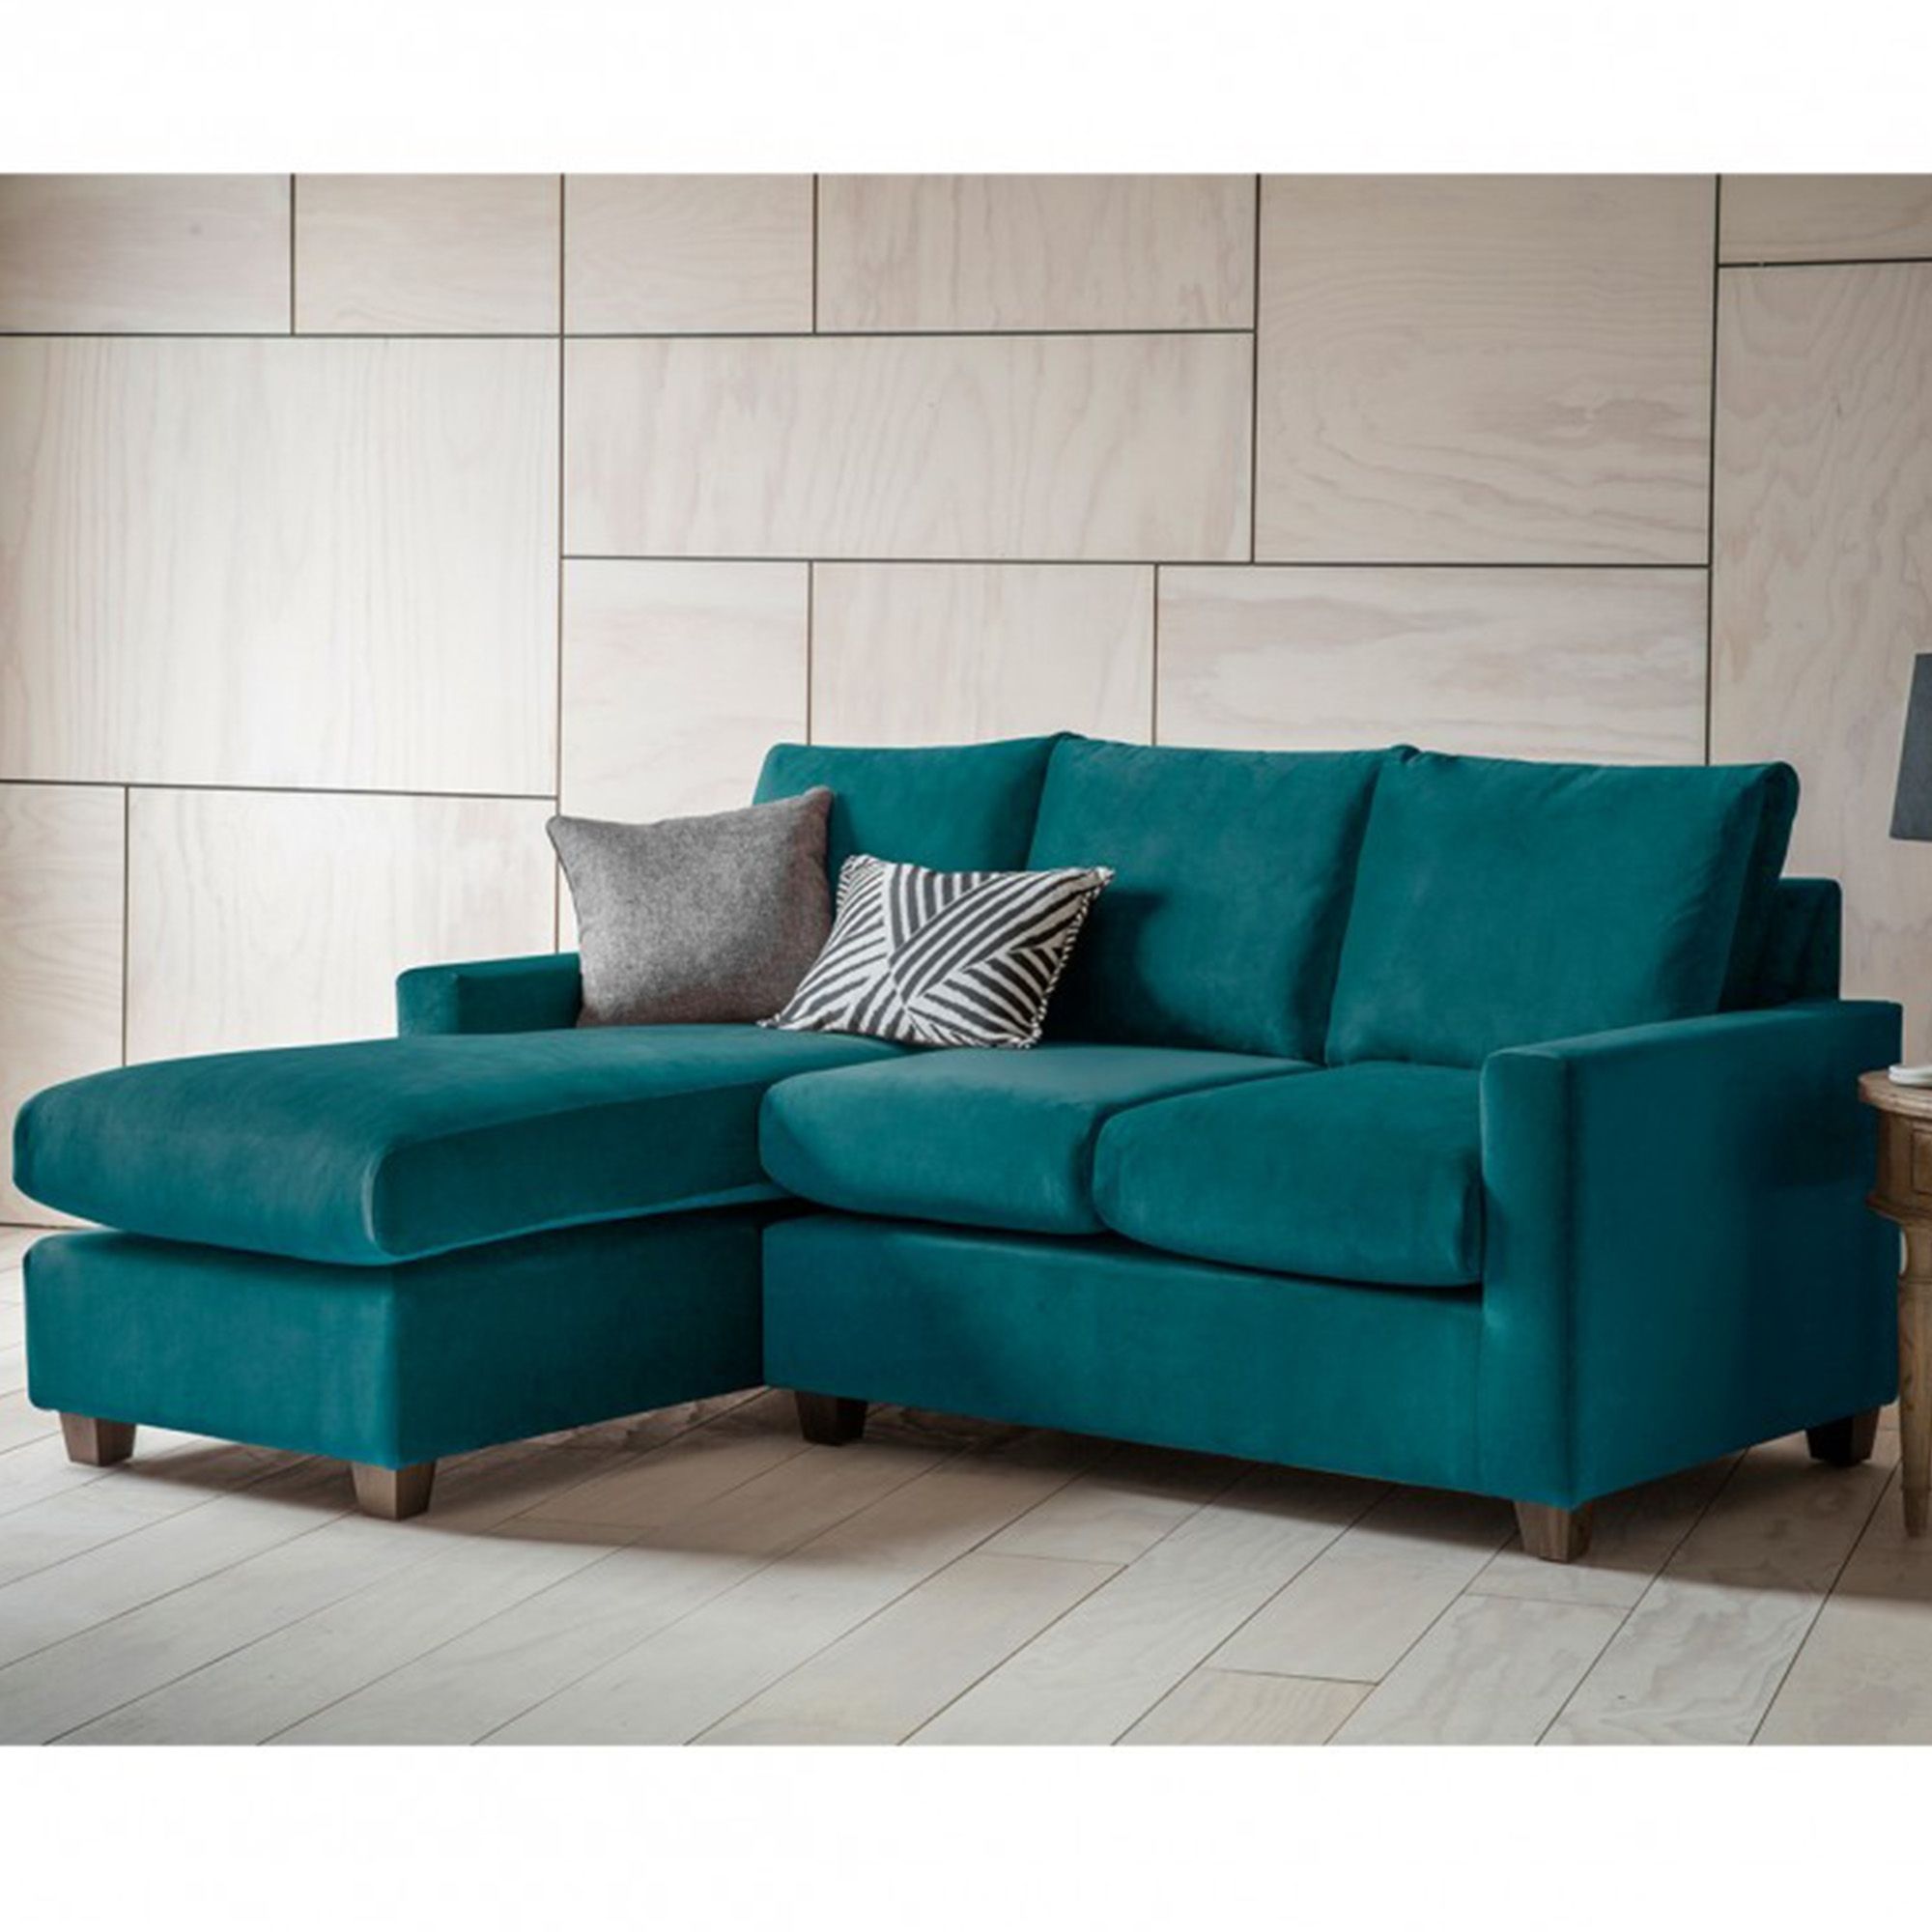 Brussels Petrol Stratford Rh Chaise Sofa | Seating From Inside Stratford Sofas (View 11 of 15)